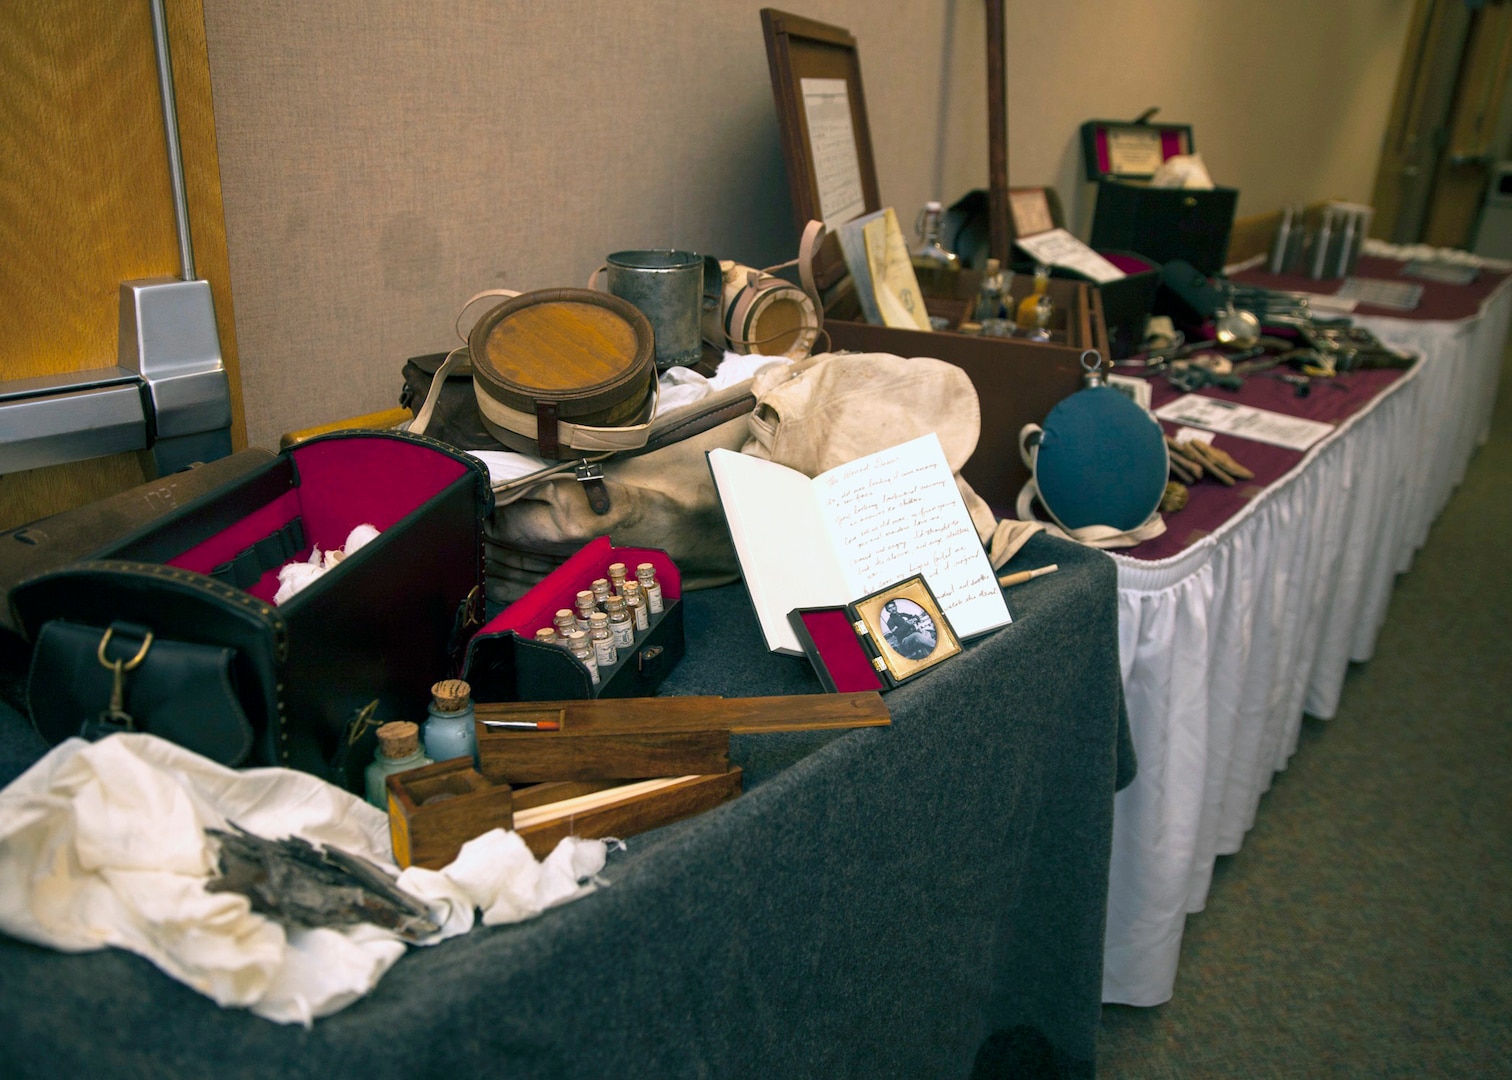 Medical items from the past are on display during the Brooke Army Medical Center 116th Army Nurse Corps birthday celebration Feb. 2 in the BAMC auditorium at Joint Base San Antonio-Fort Sam Houston.